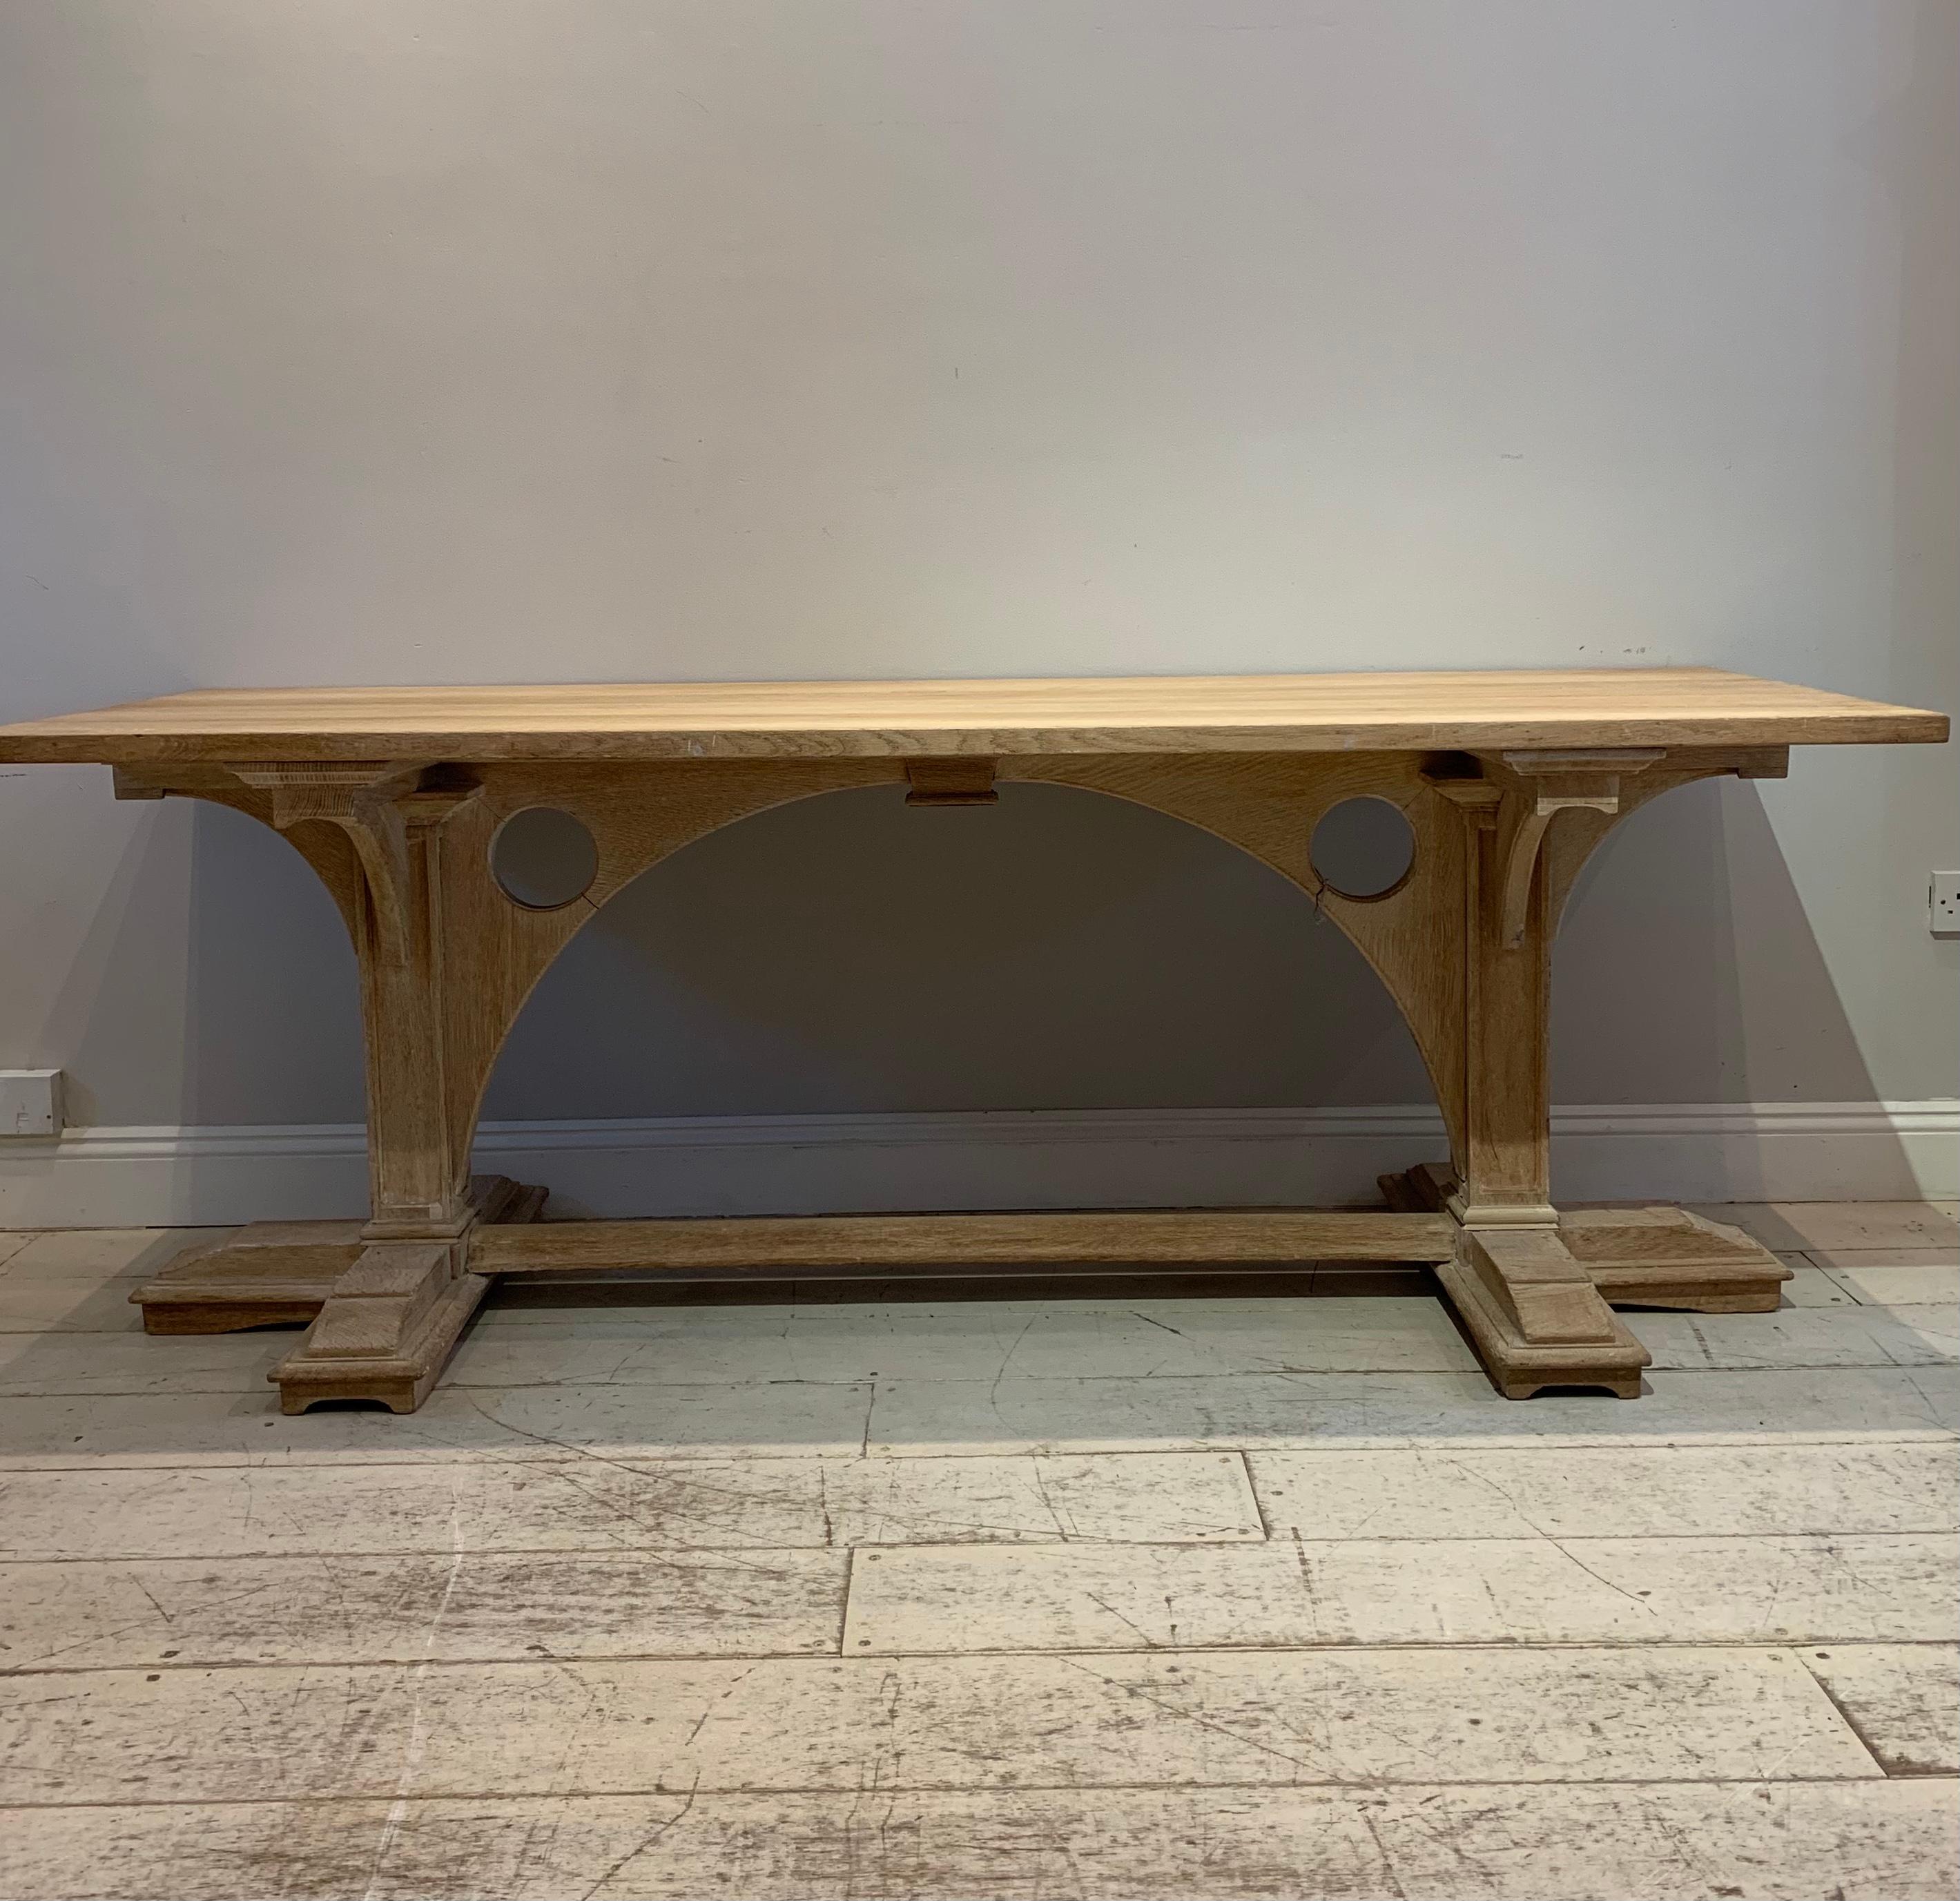 A good sized circa 1920s bleached oak refectory table.
The top is a light honey colour which sits on a substantial and interesting base that is both architectural and quite gothic in its design which resembles a bridge
The base support is solid